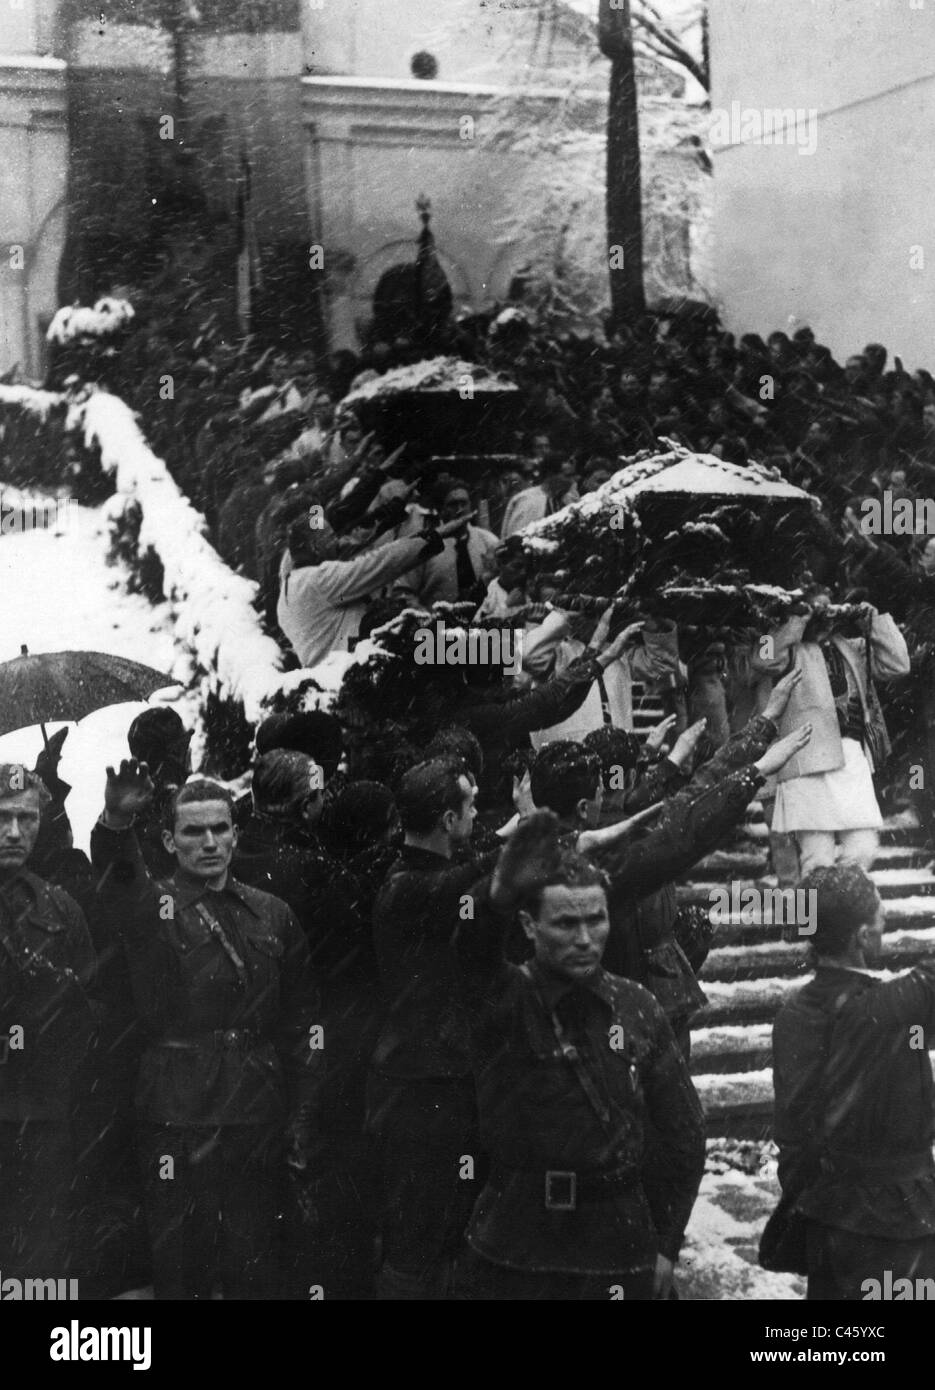 Members of the Iron Guard carry fallen to the grave, 1937 Stock Photo